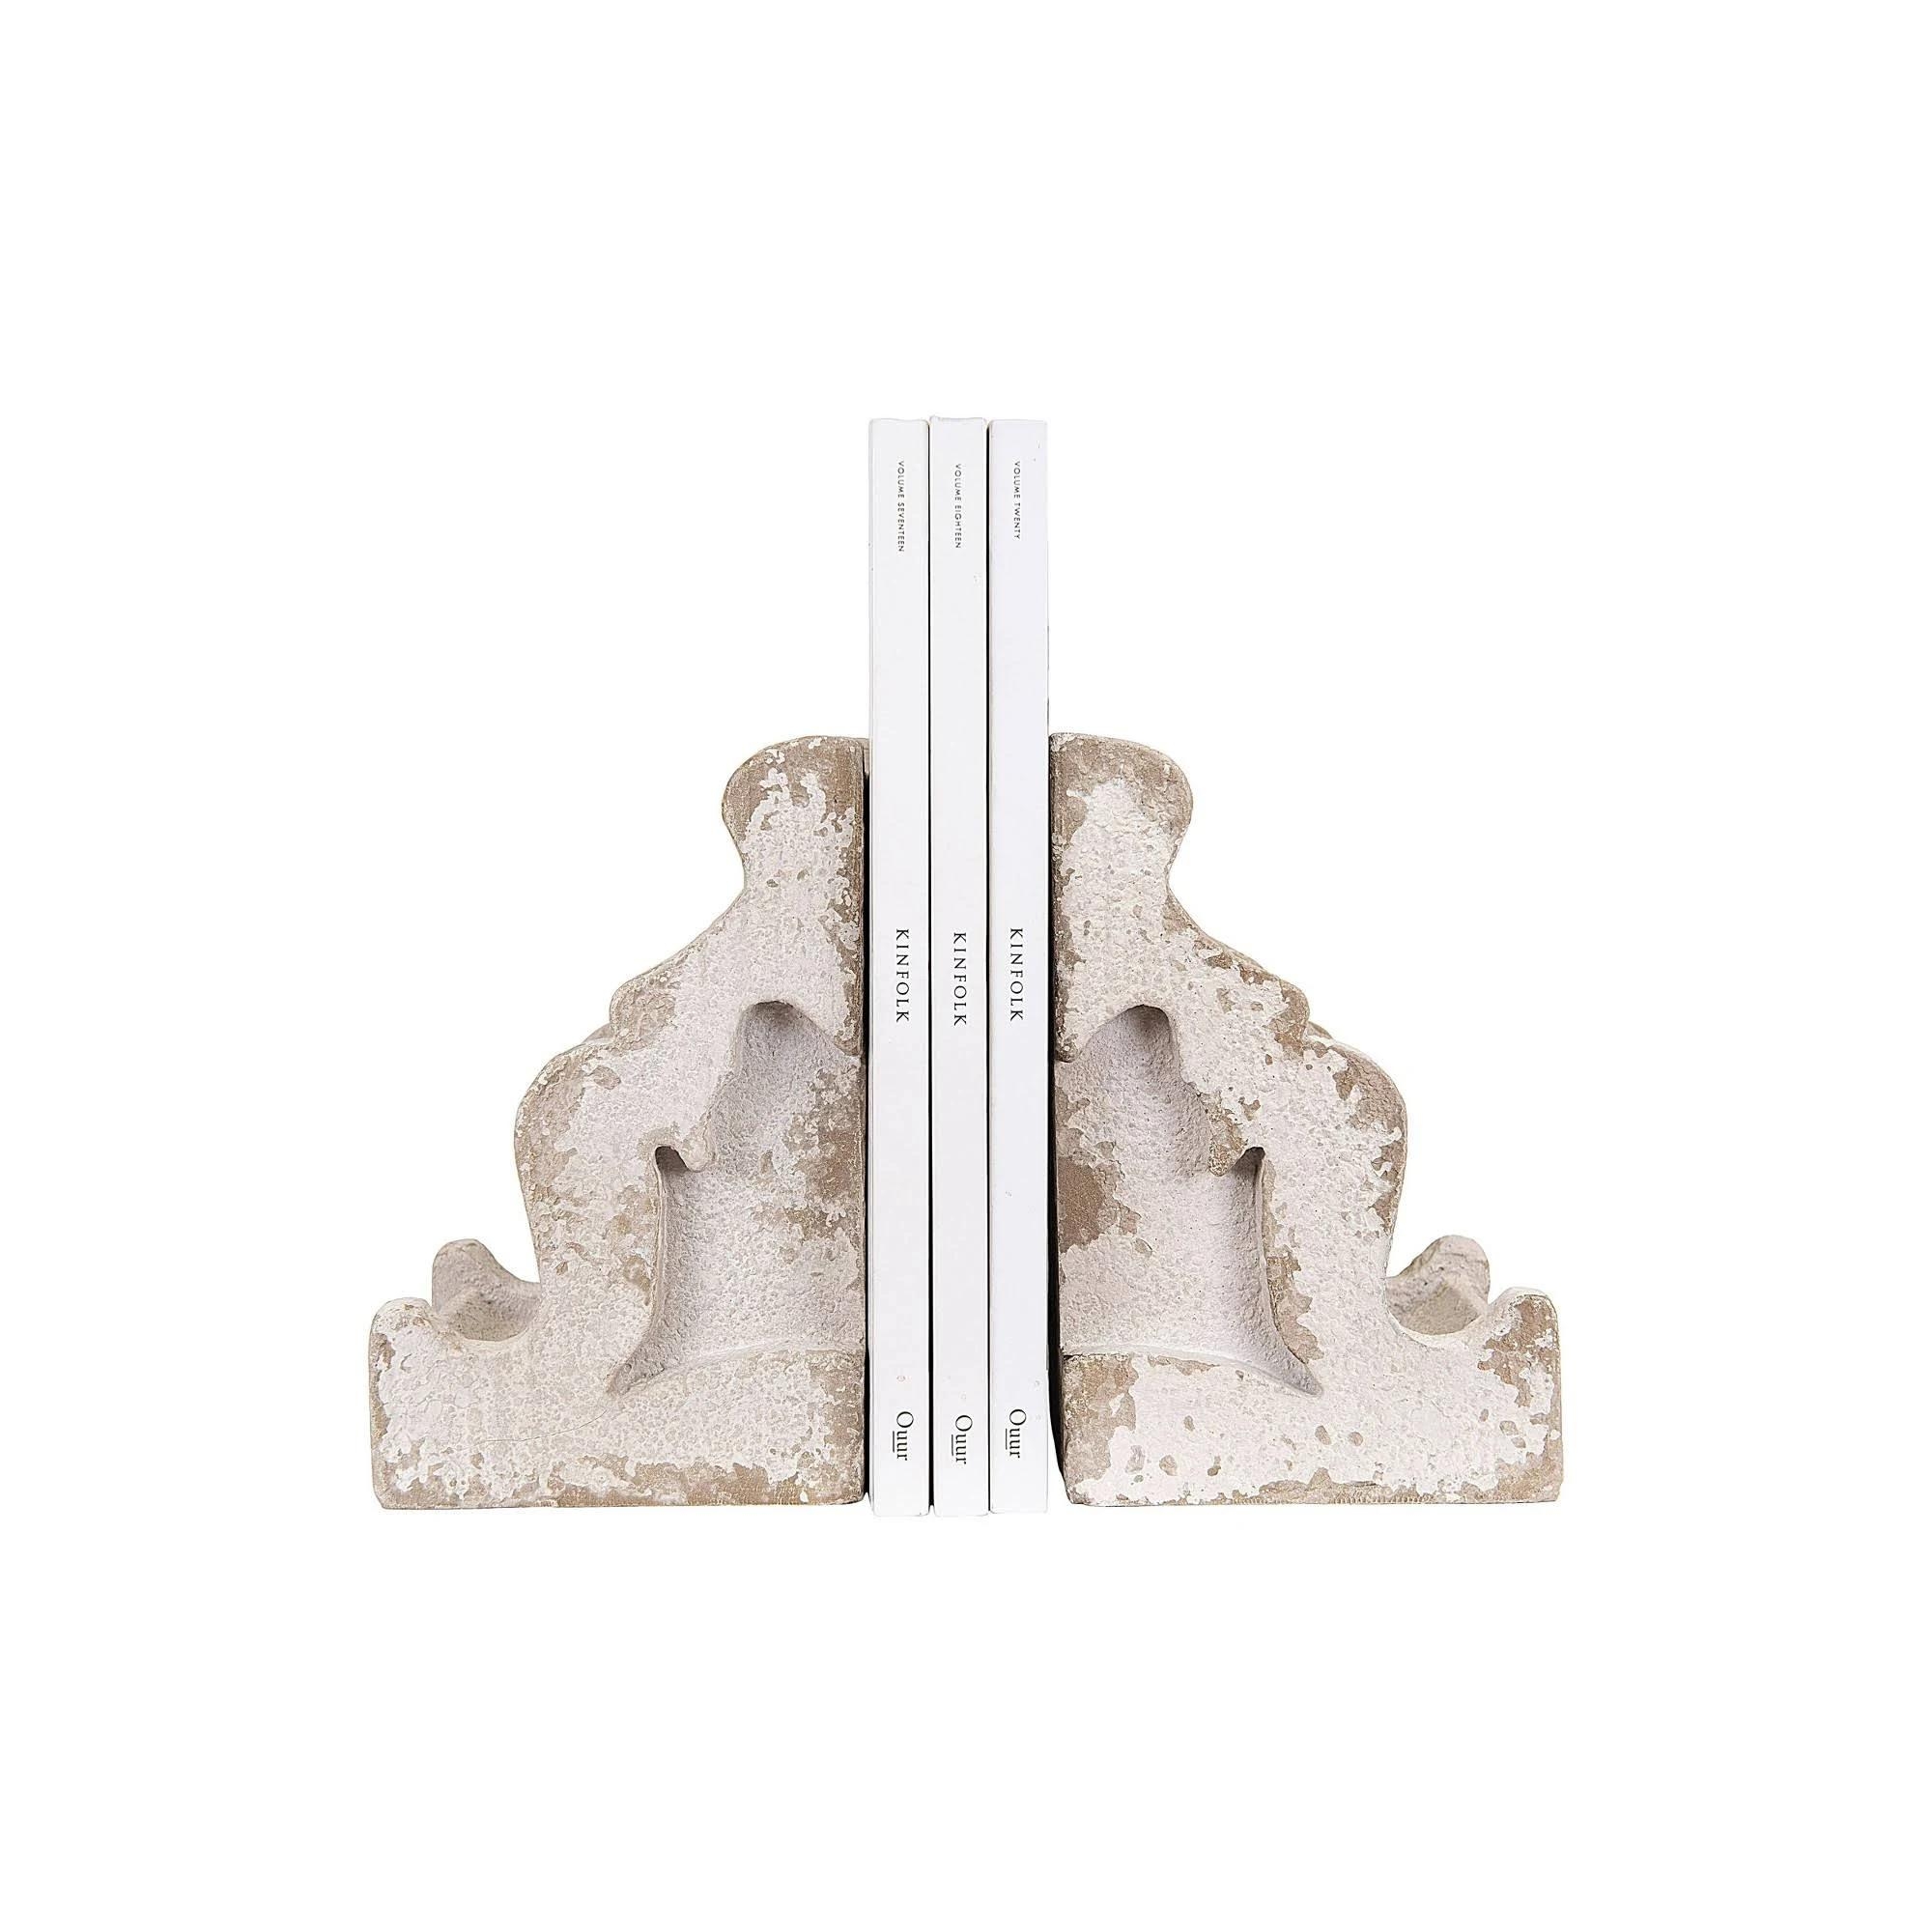 Distressed White Corbel Shaped Bookends (Set of 2 Pieces) - Image 3